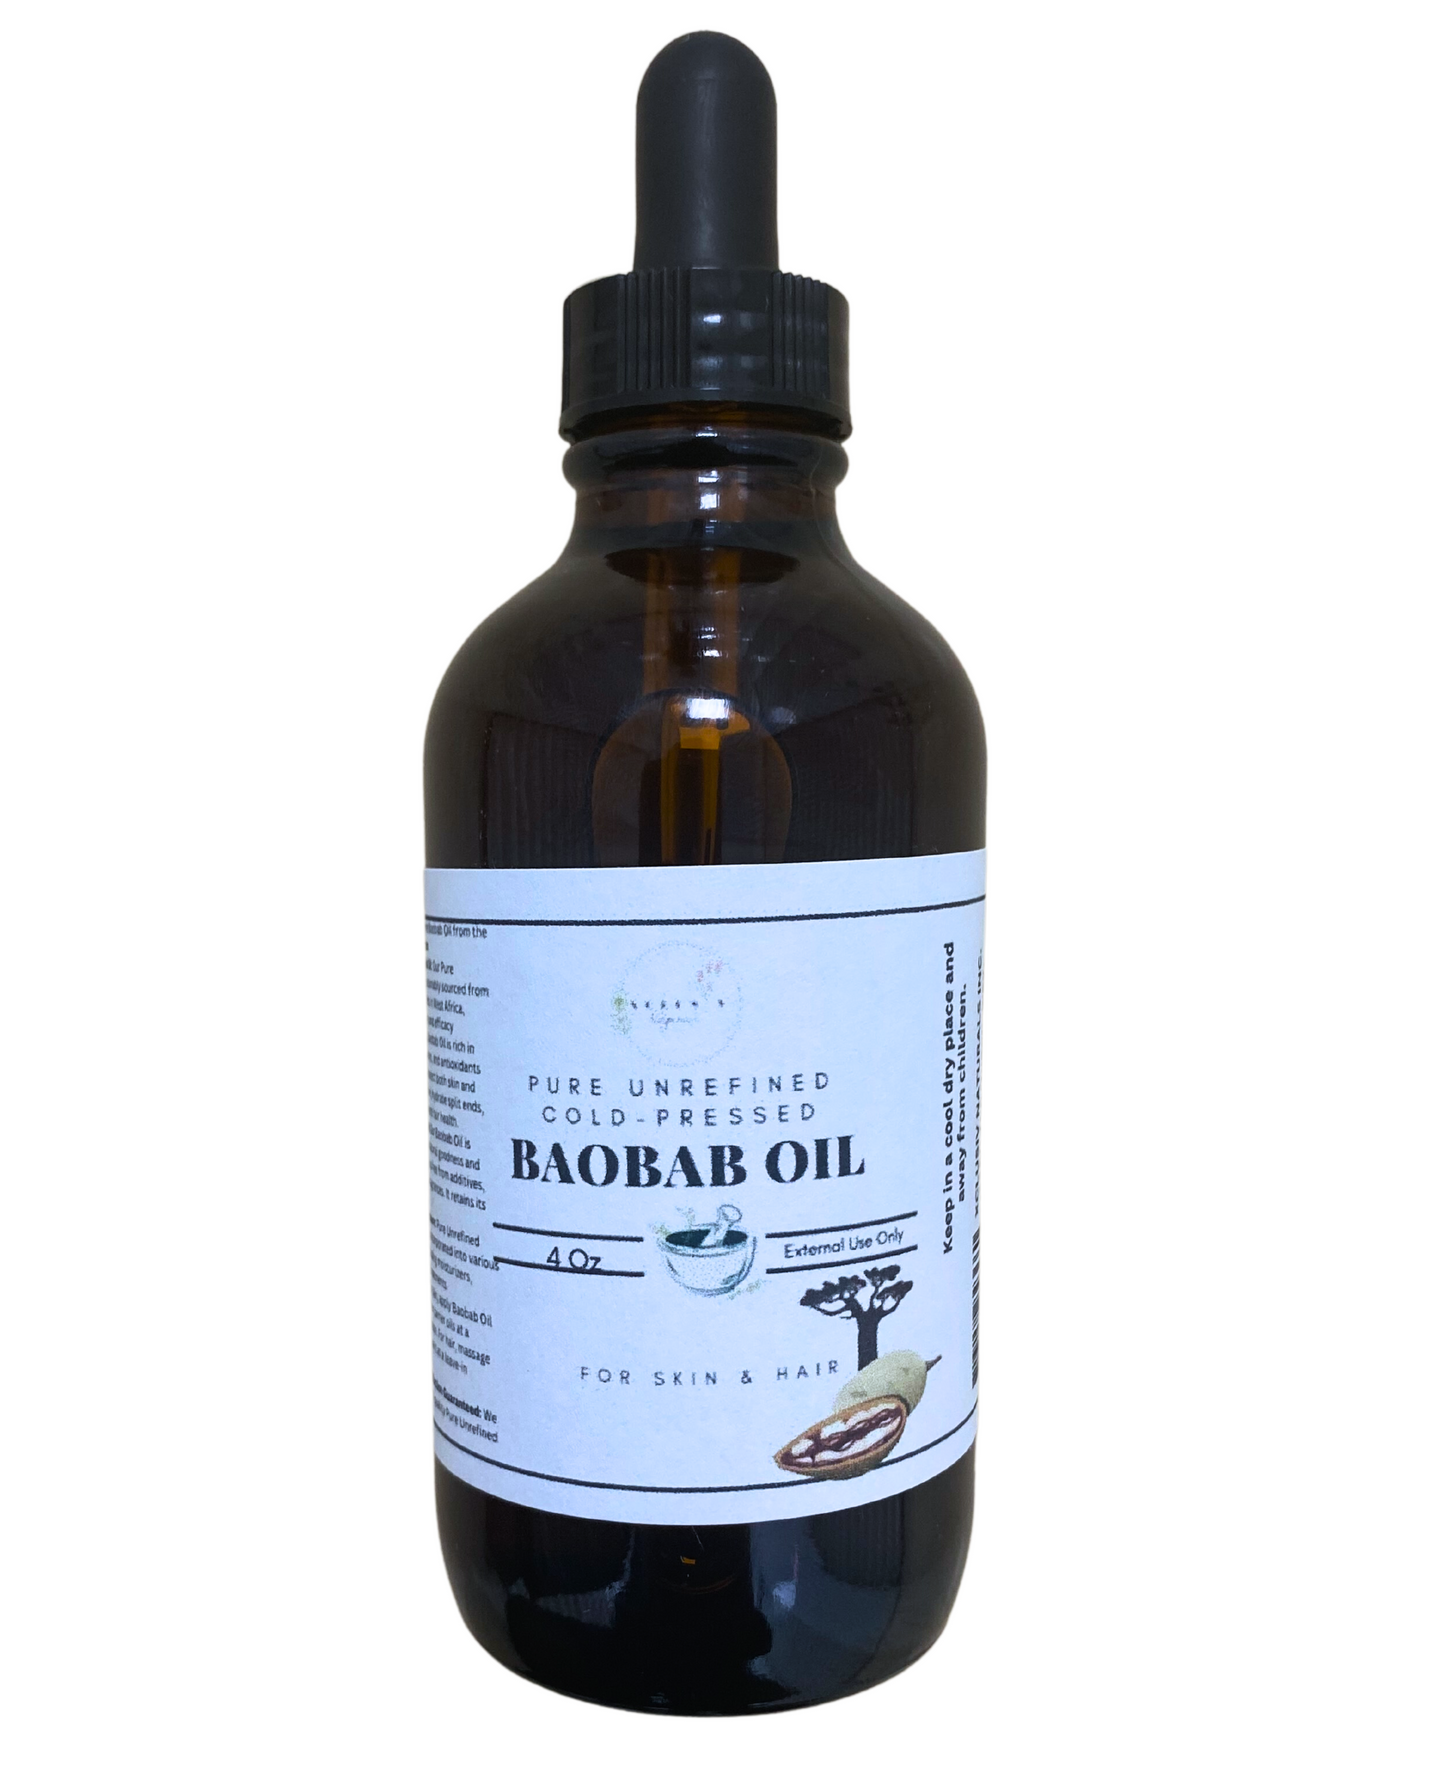 Baobab Oil - Unrefined Natural African Baobab Cold-Pressed Extract Oil 16oz